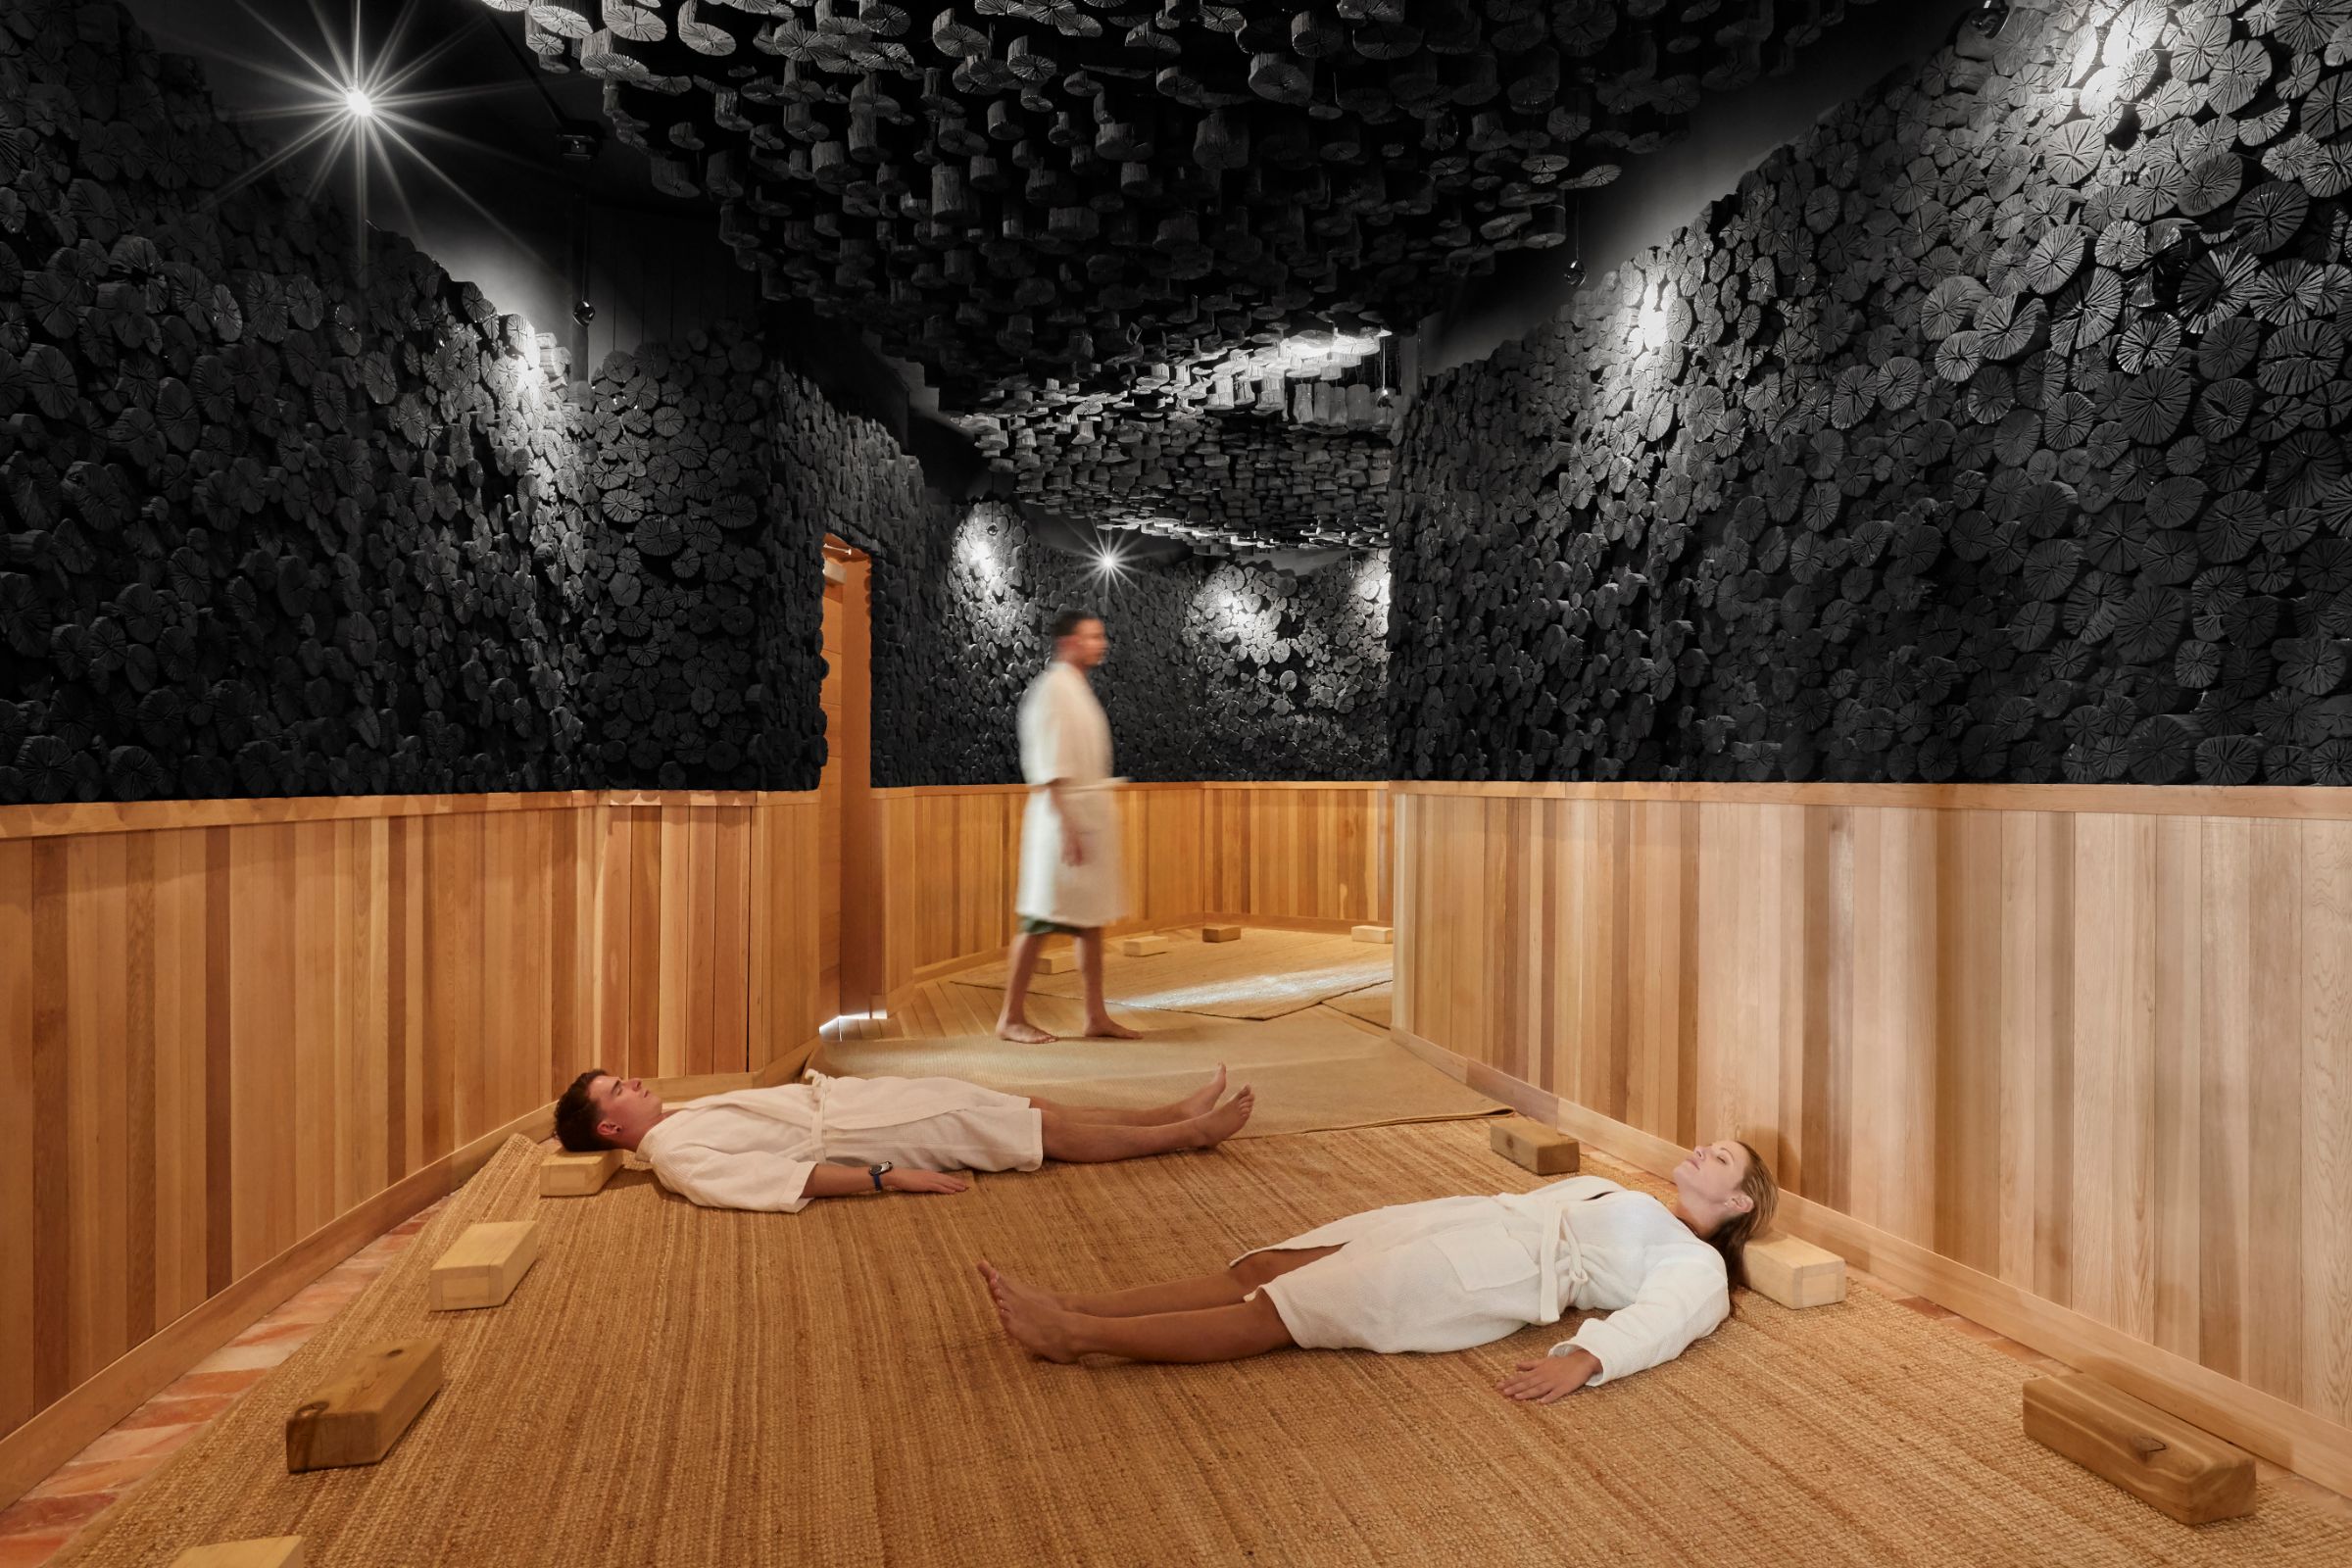 Two people relaxing in the charcoal sauna at Sojo Spa Club as another person enters the sauna room